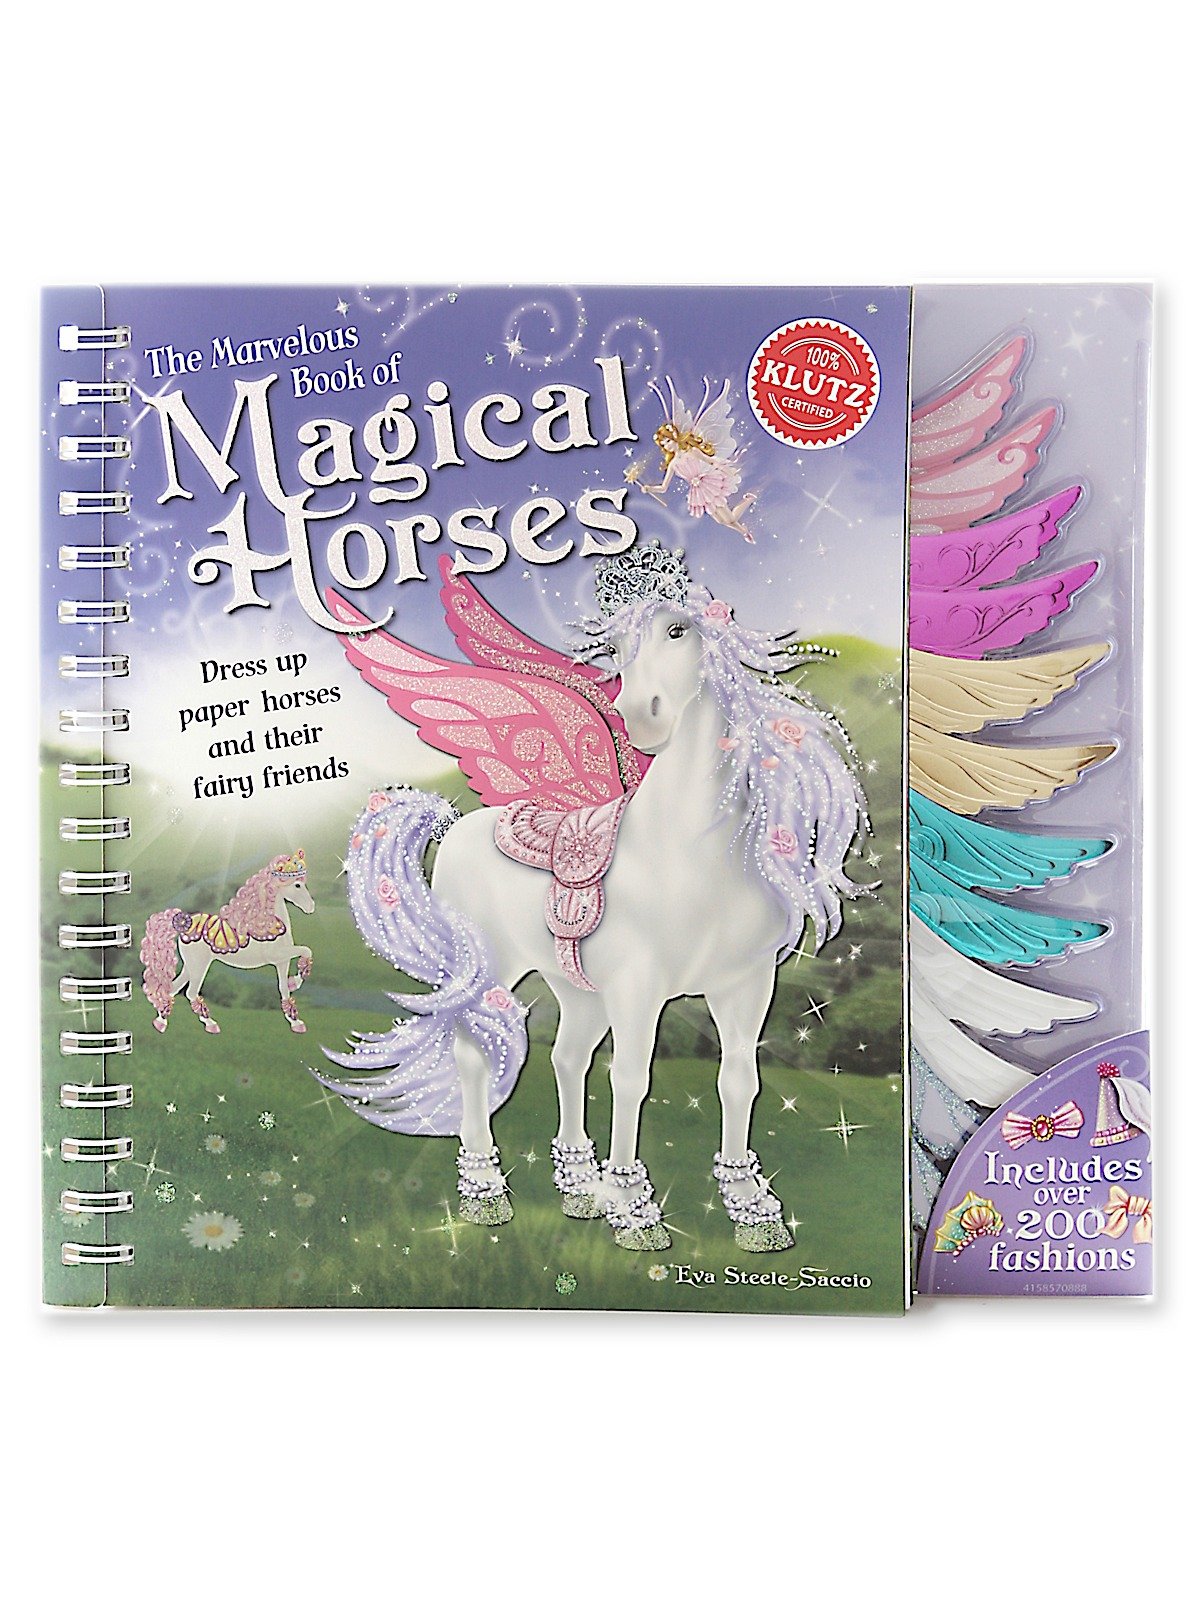 Klutz - Marvelous Book of Magical Horses